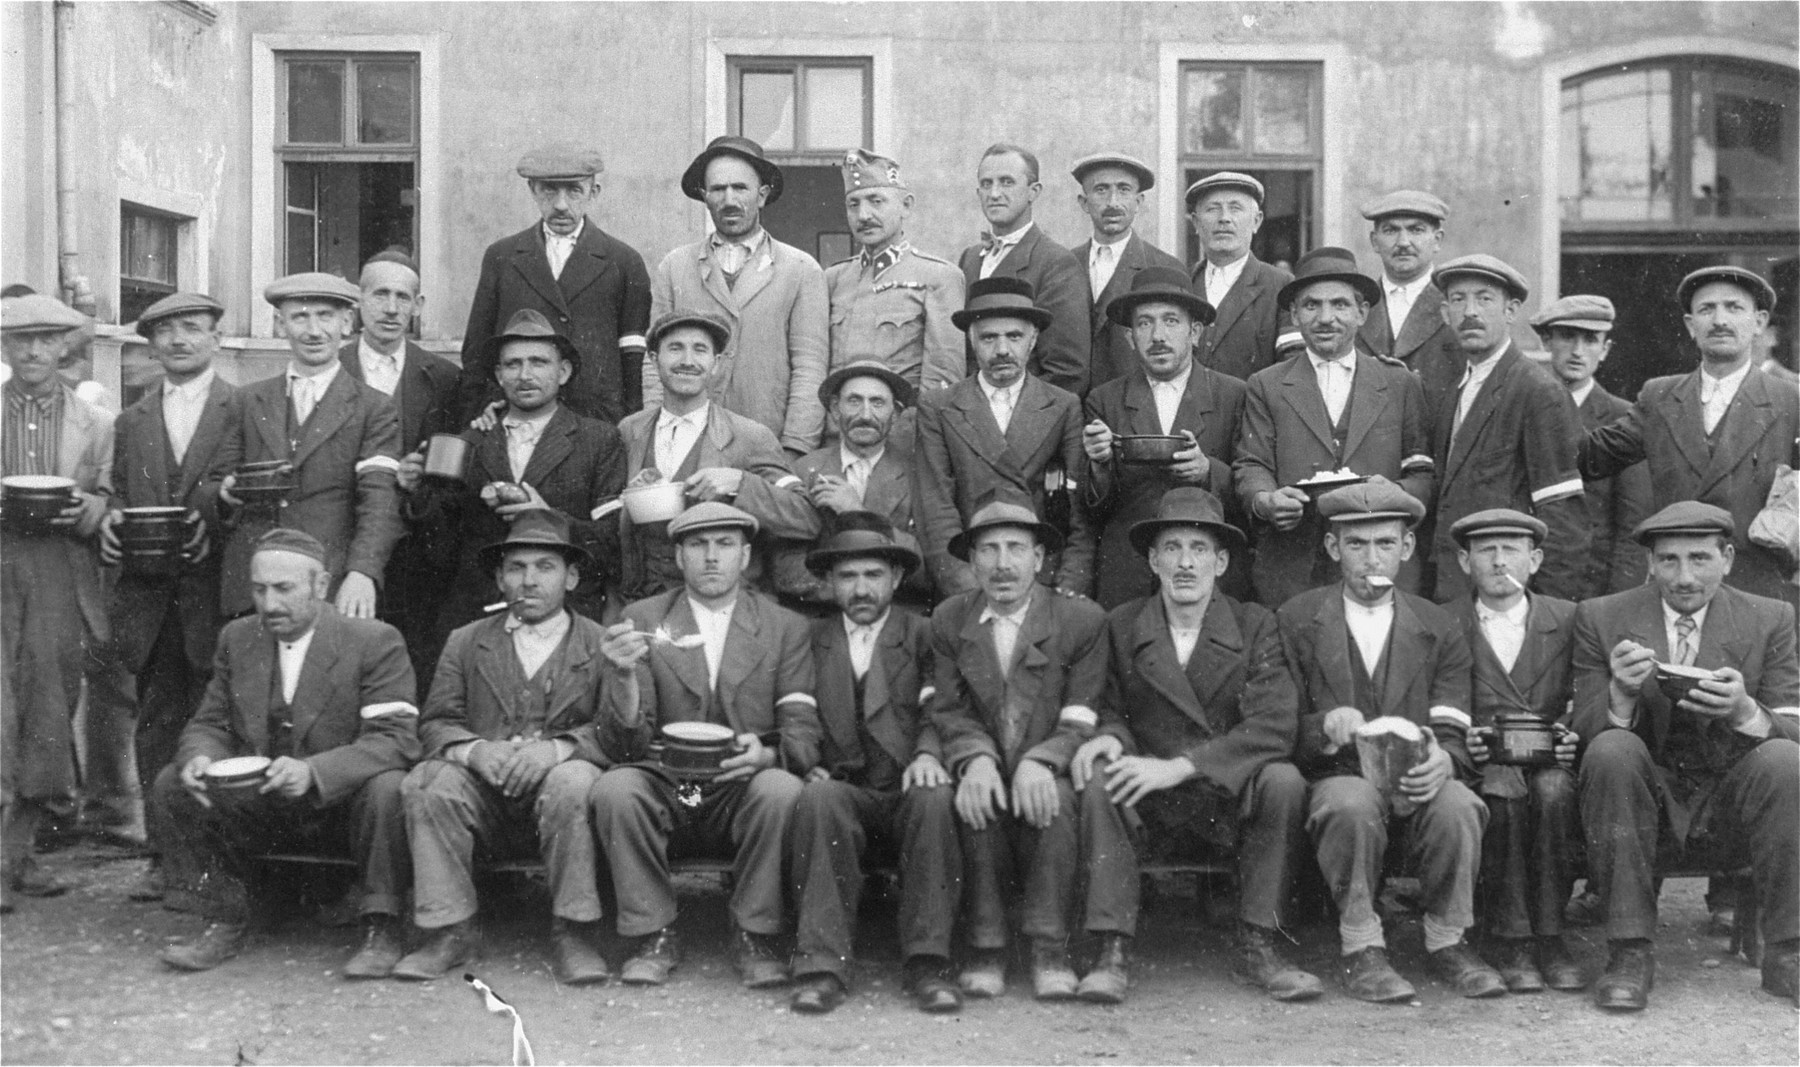 Group portrait of members of an Hungarian Jewish labor battalion in Mukachevo. 

Few of these men survived the war.